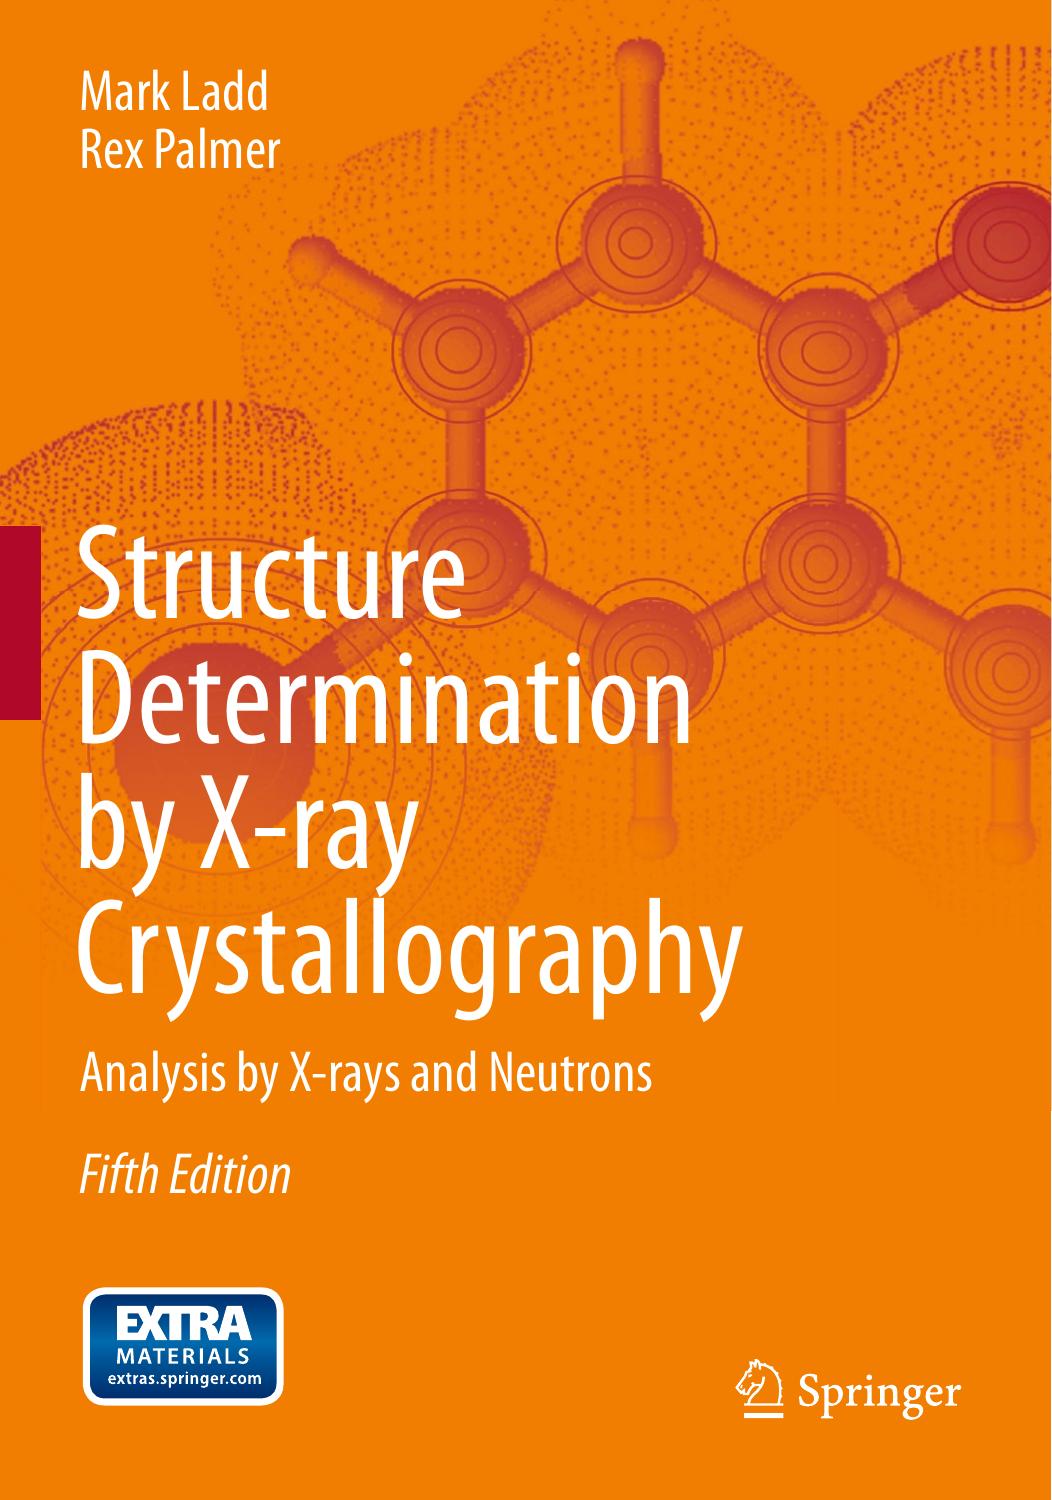 Structure Determination by X-ray Crystallography by Mark Ladd & Rex Palmer